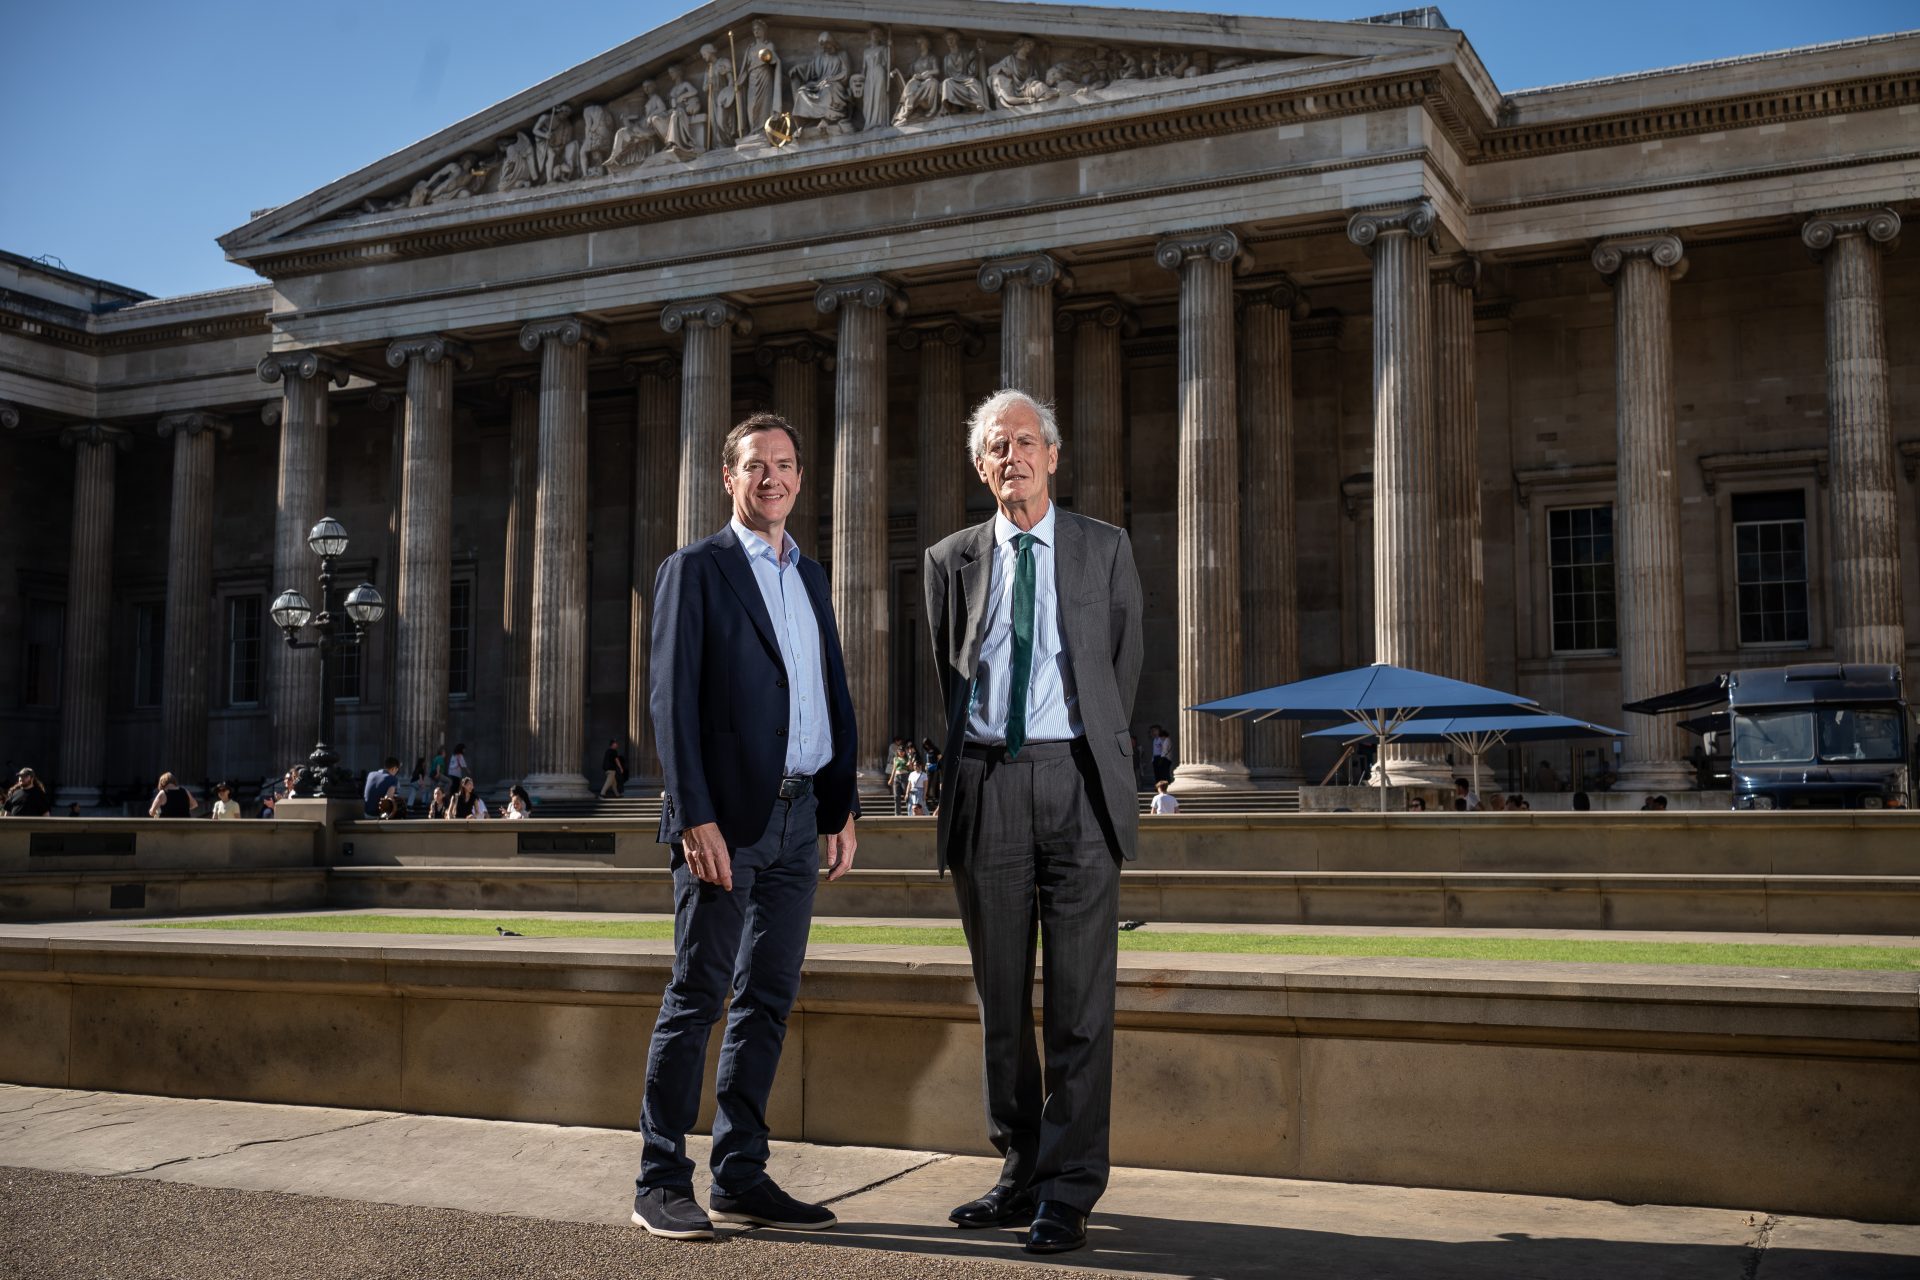 The British Museum Chair hopes the deal will go through as well